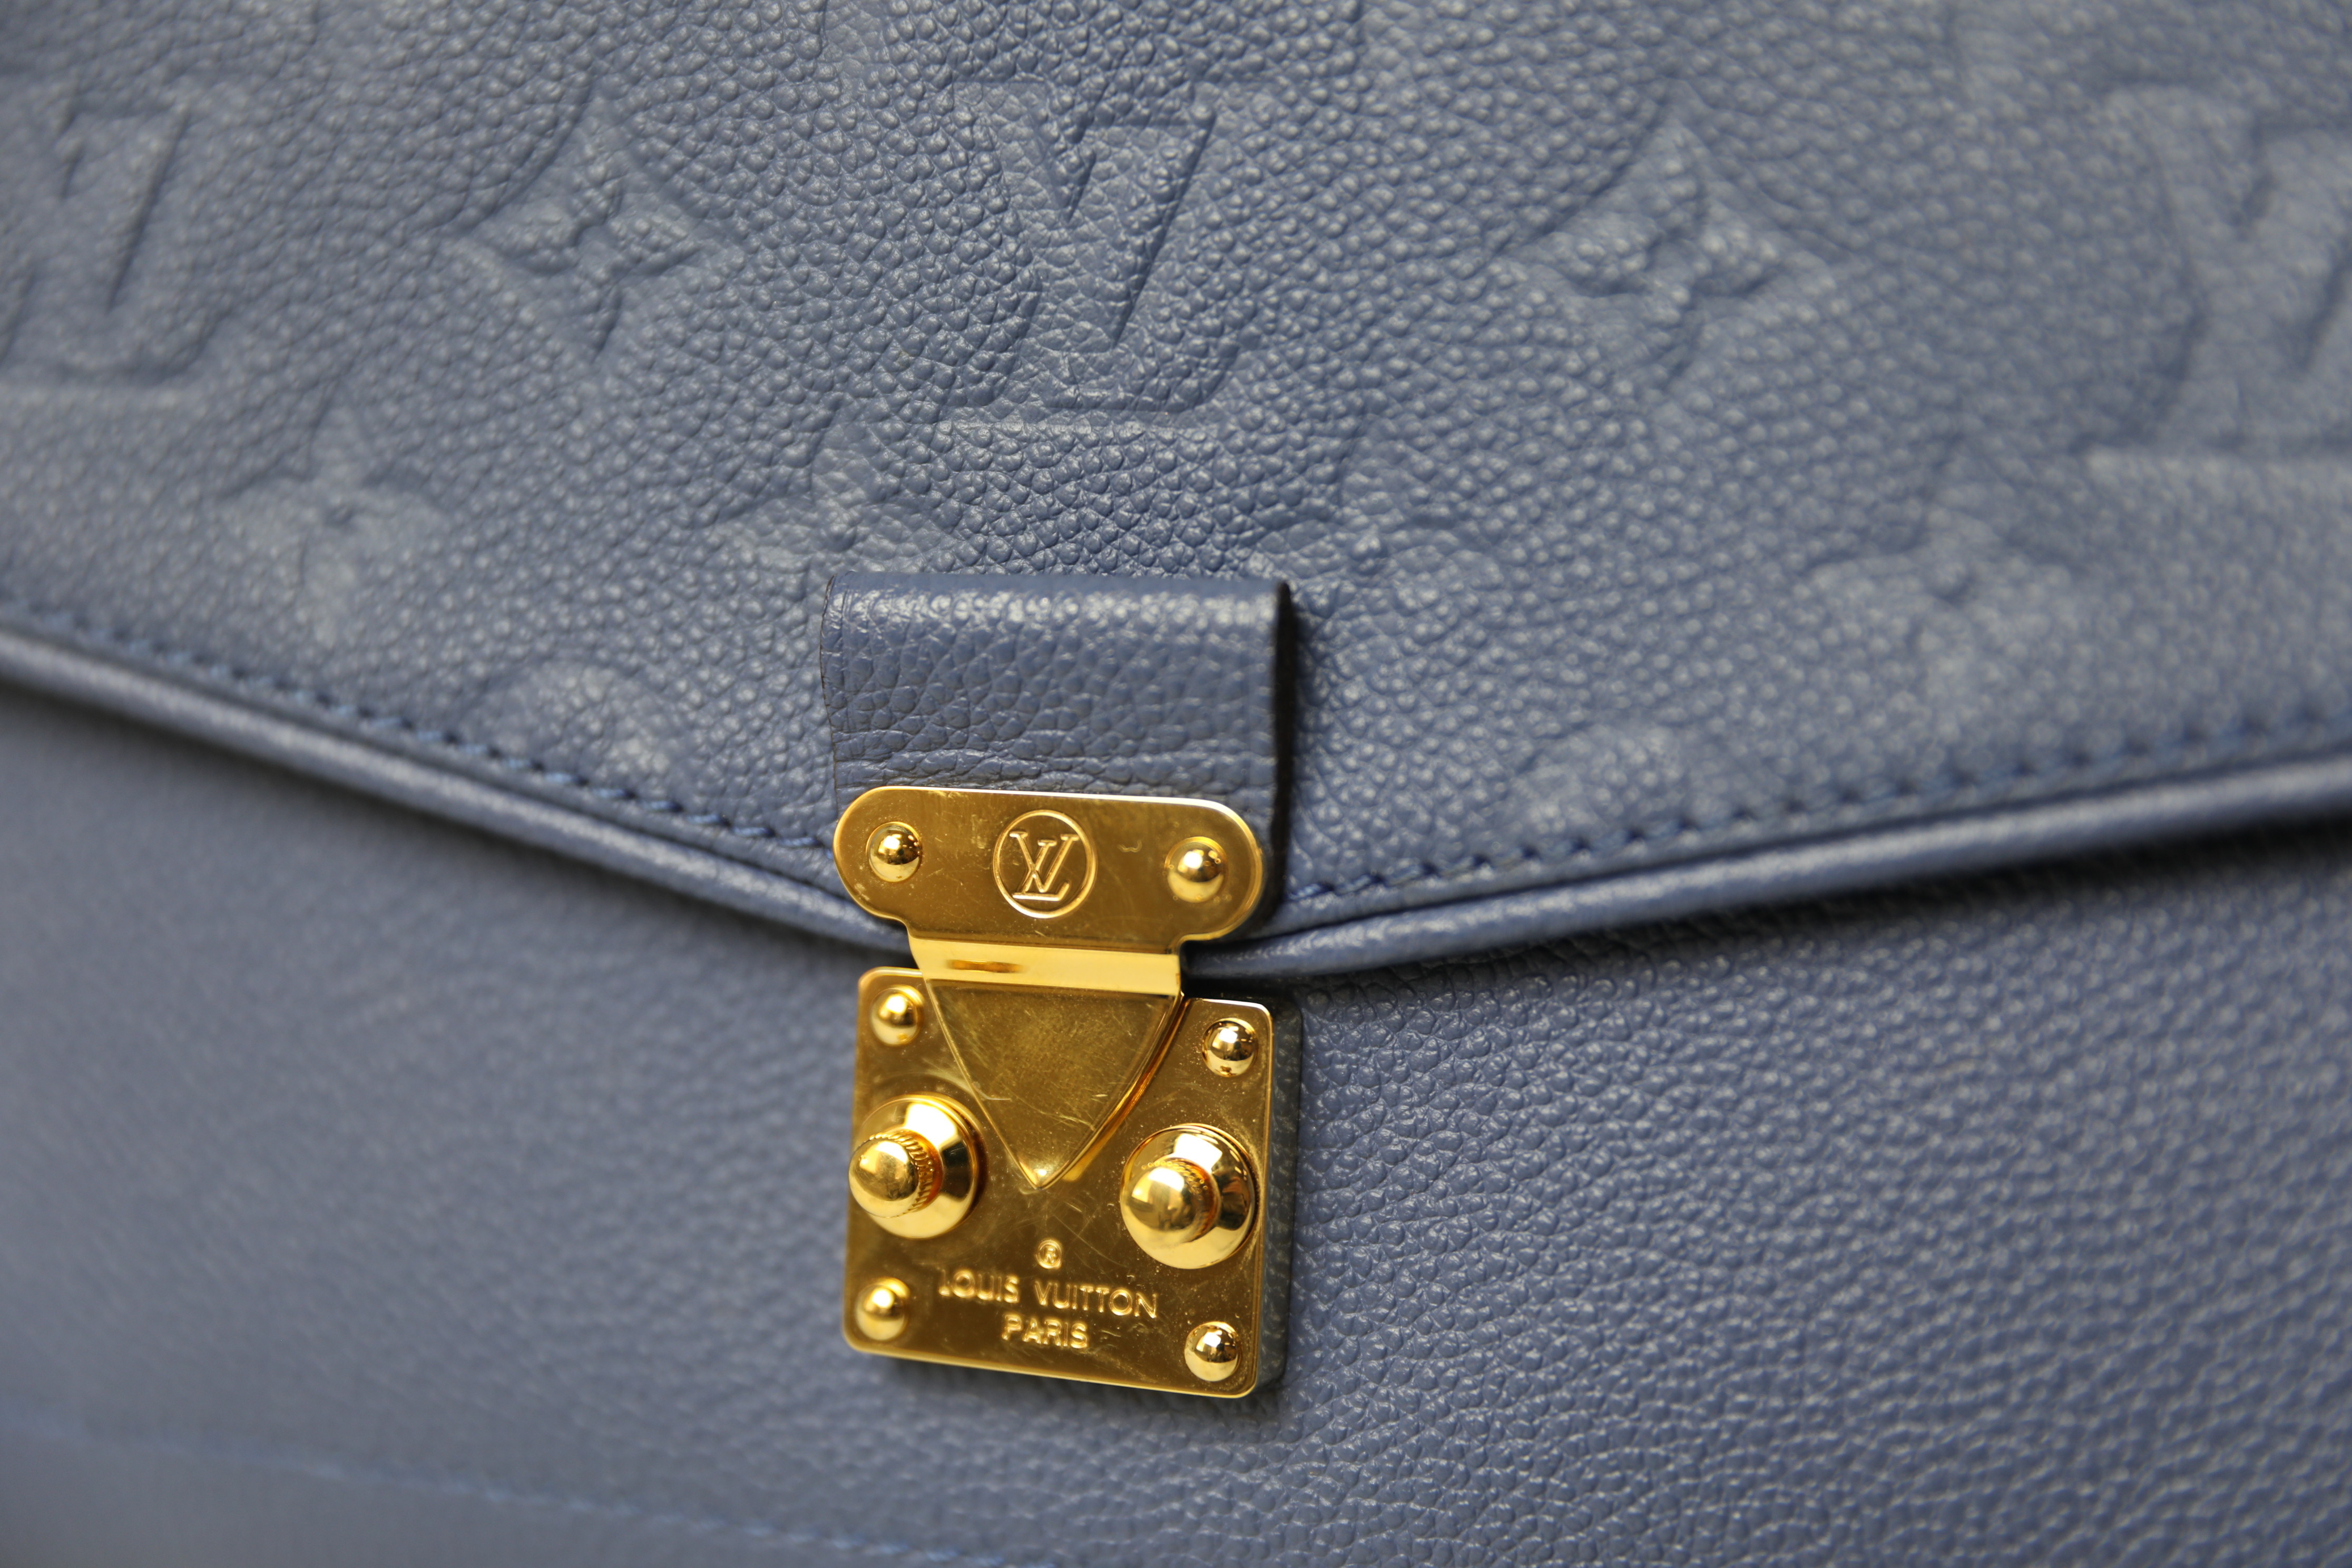 Louis Vuitton St. Germain MM, Blue Denim Leather, Preowned in